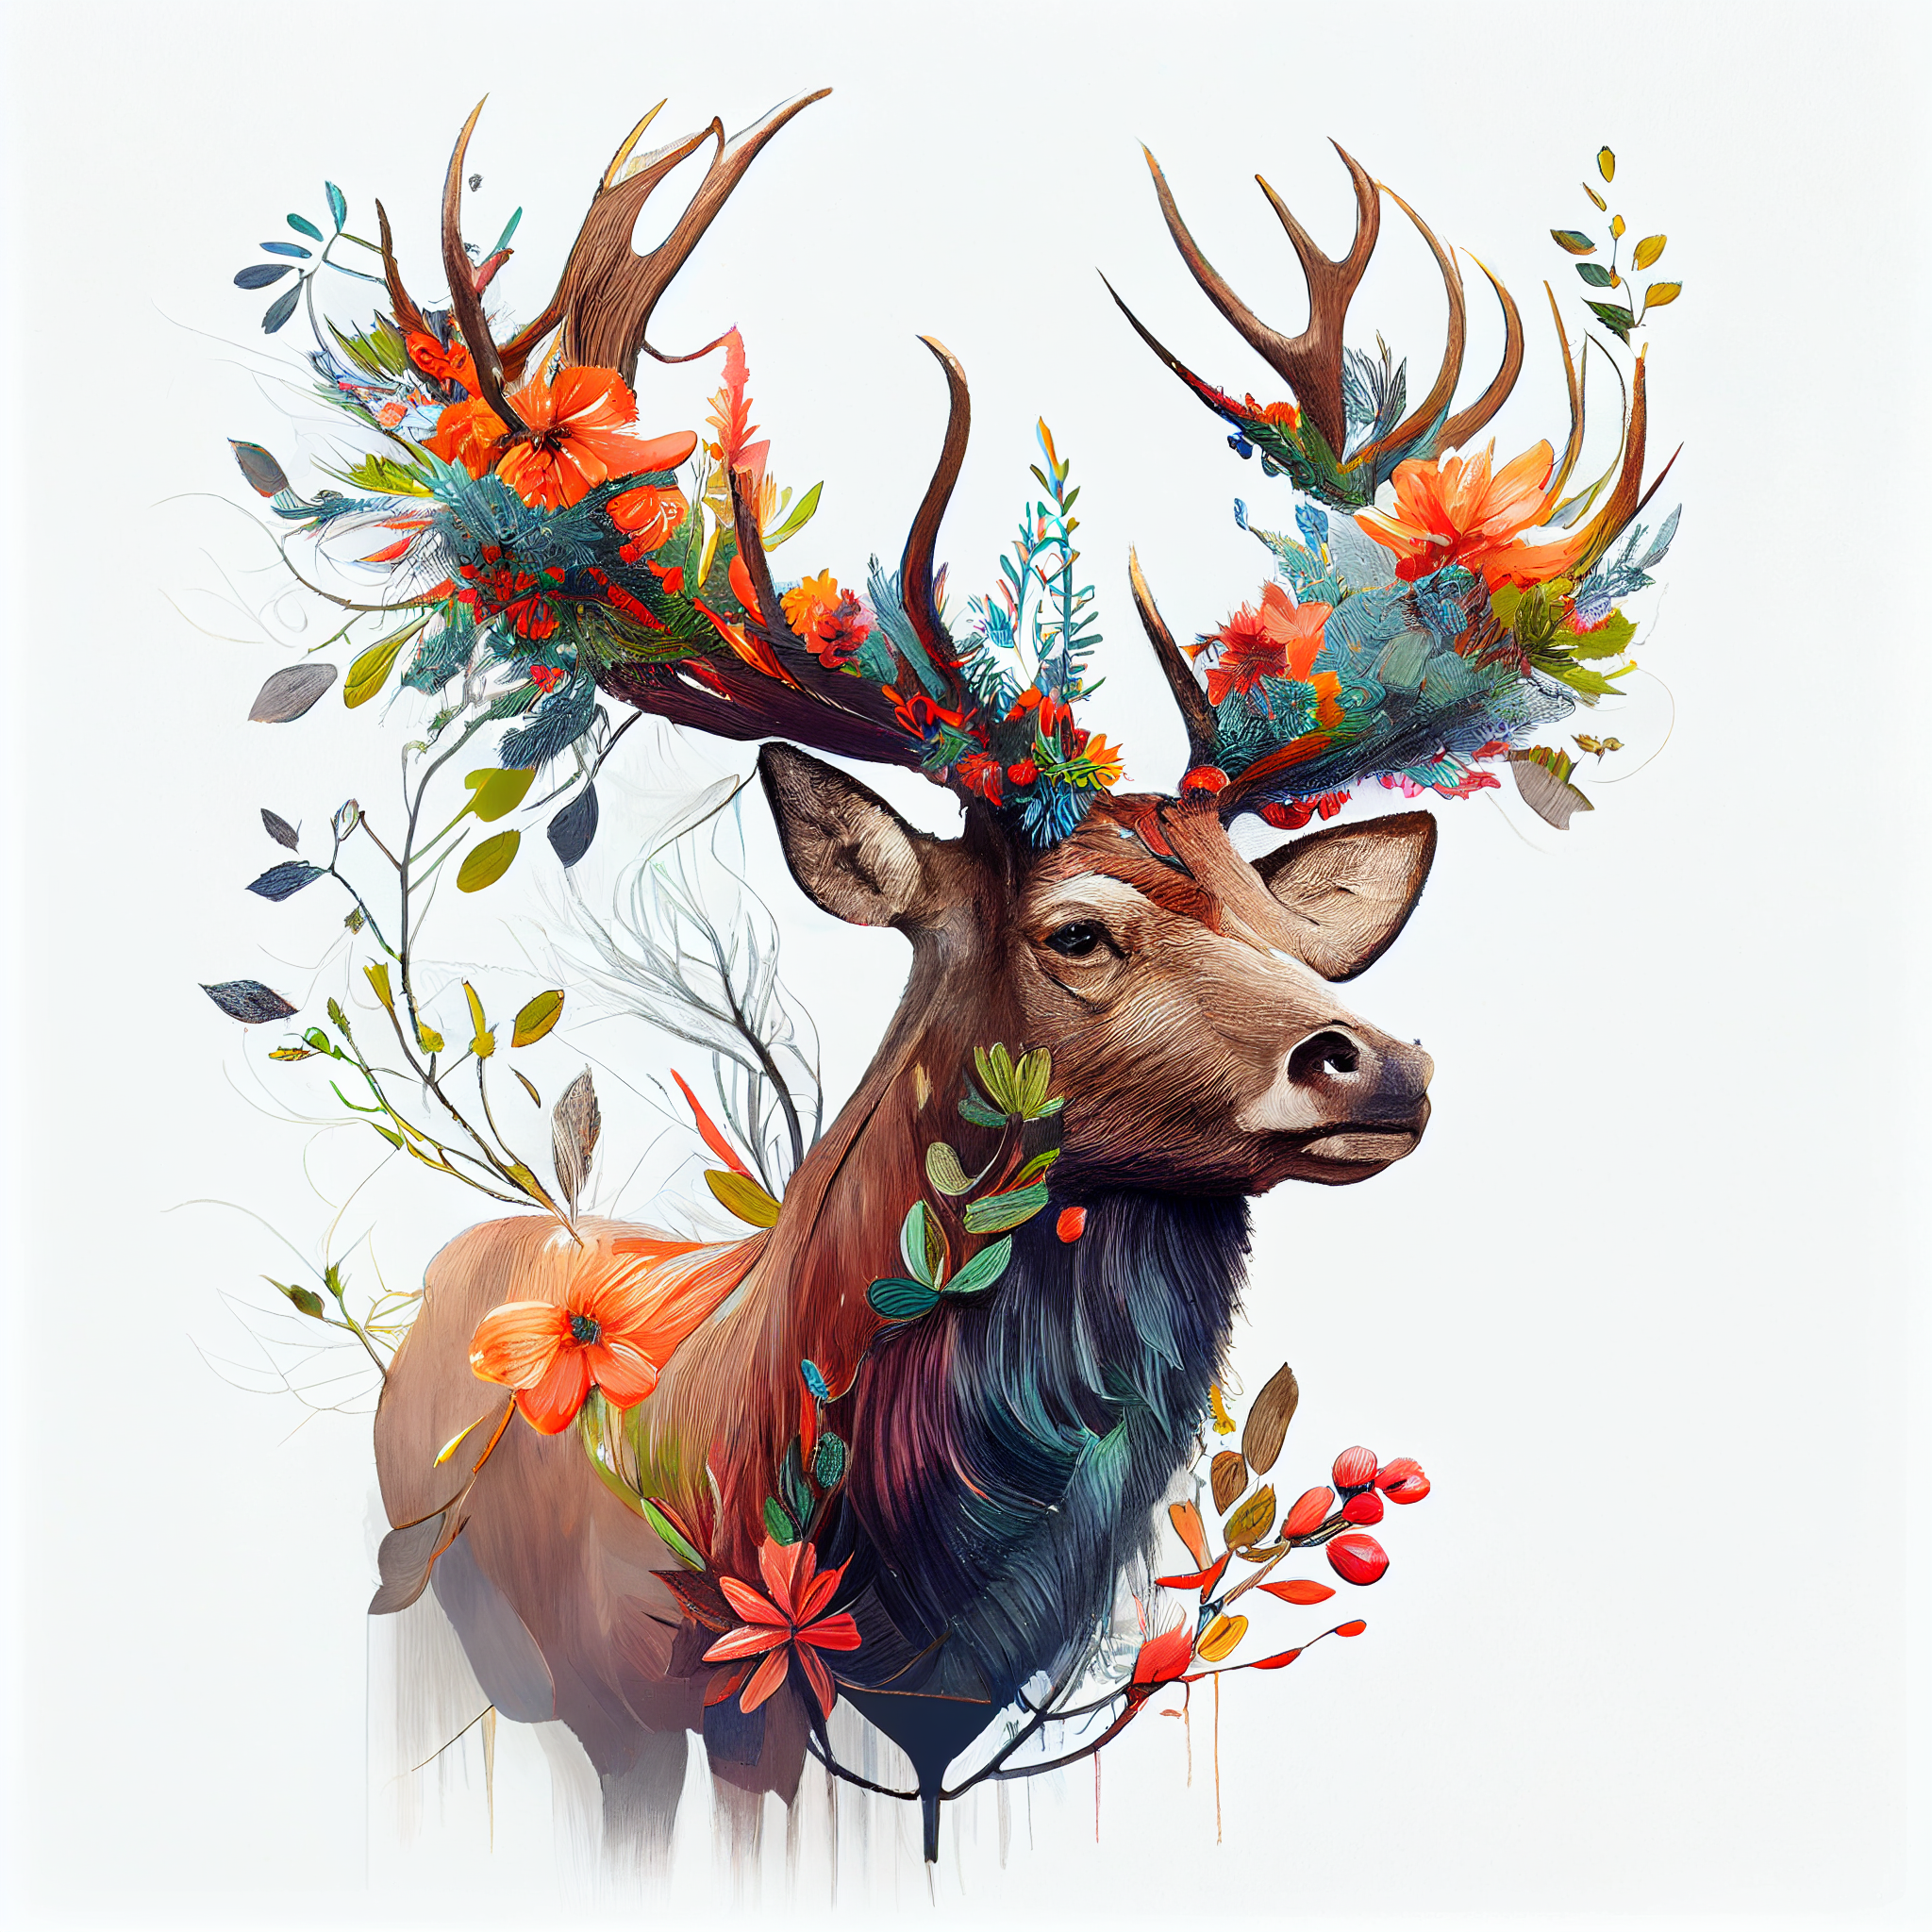 Whimsical Reindeer with Floral Antlers and Teak Wood Background in Vibrant Oil Colors